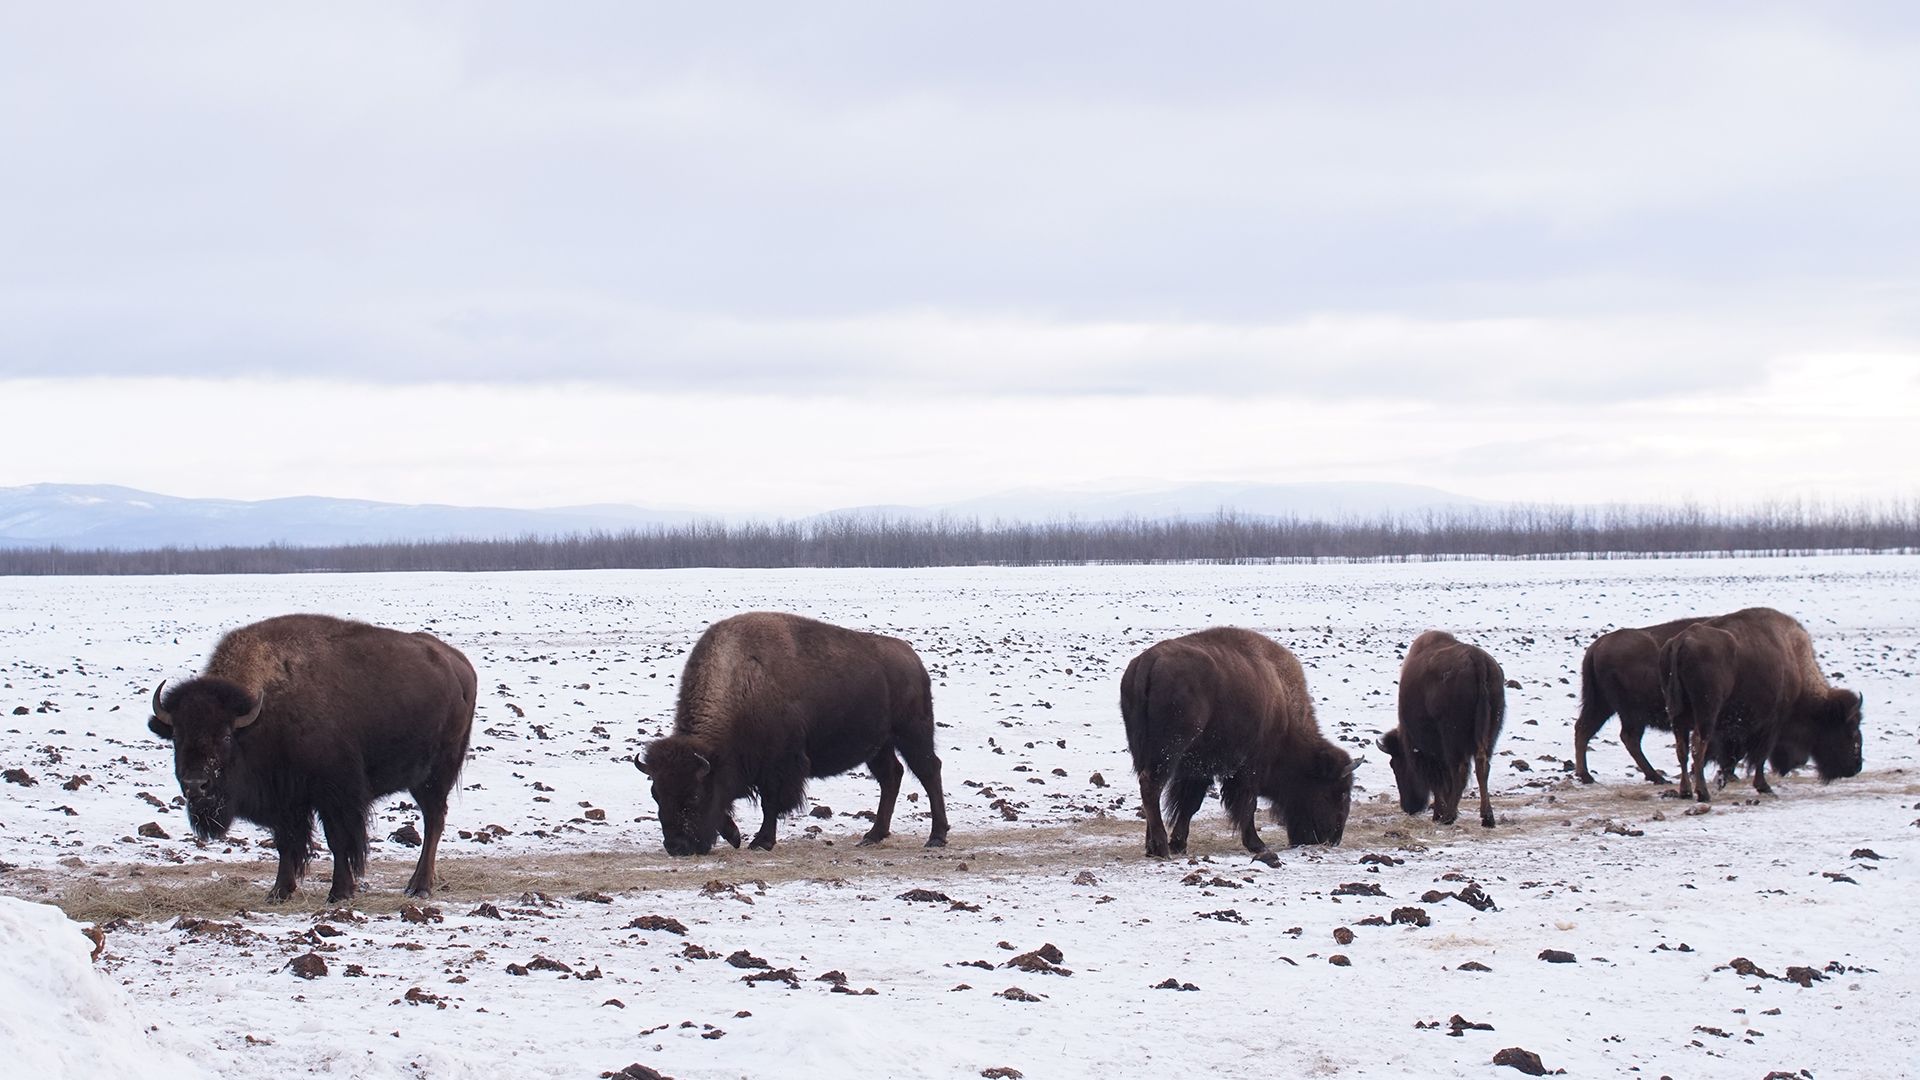 Delta Junction, AK - Bison graze in the snowy field at Stevens Ranch. This is from DR. OAKLEY,... [Photo of the day - March 2022]